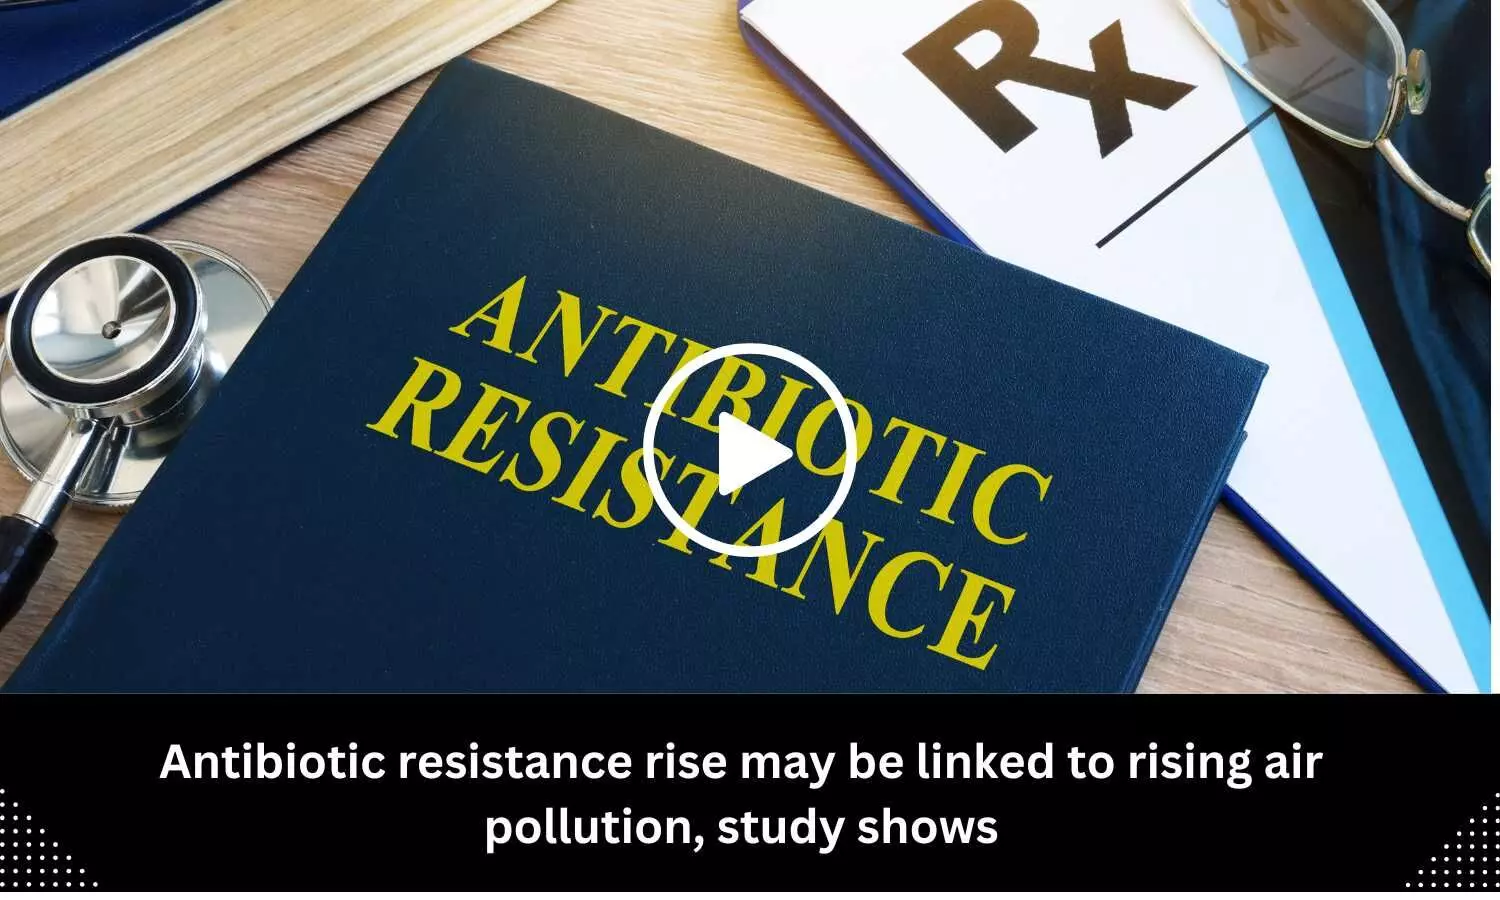 Antibiotic resistance rise may be linked to rising air pollution, study shows